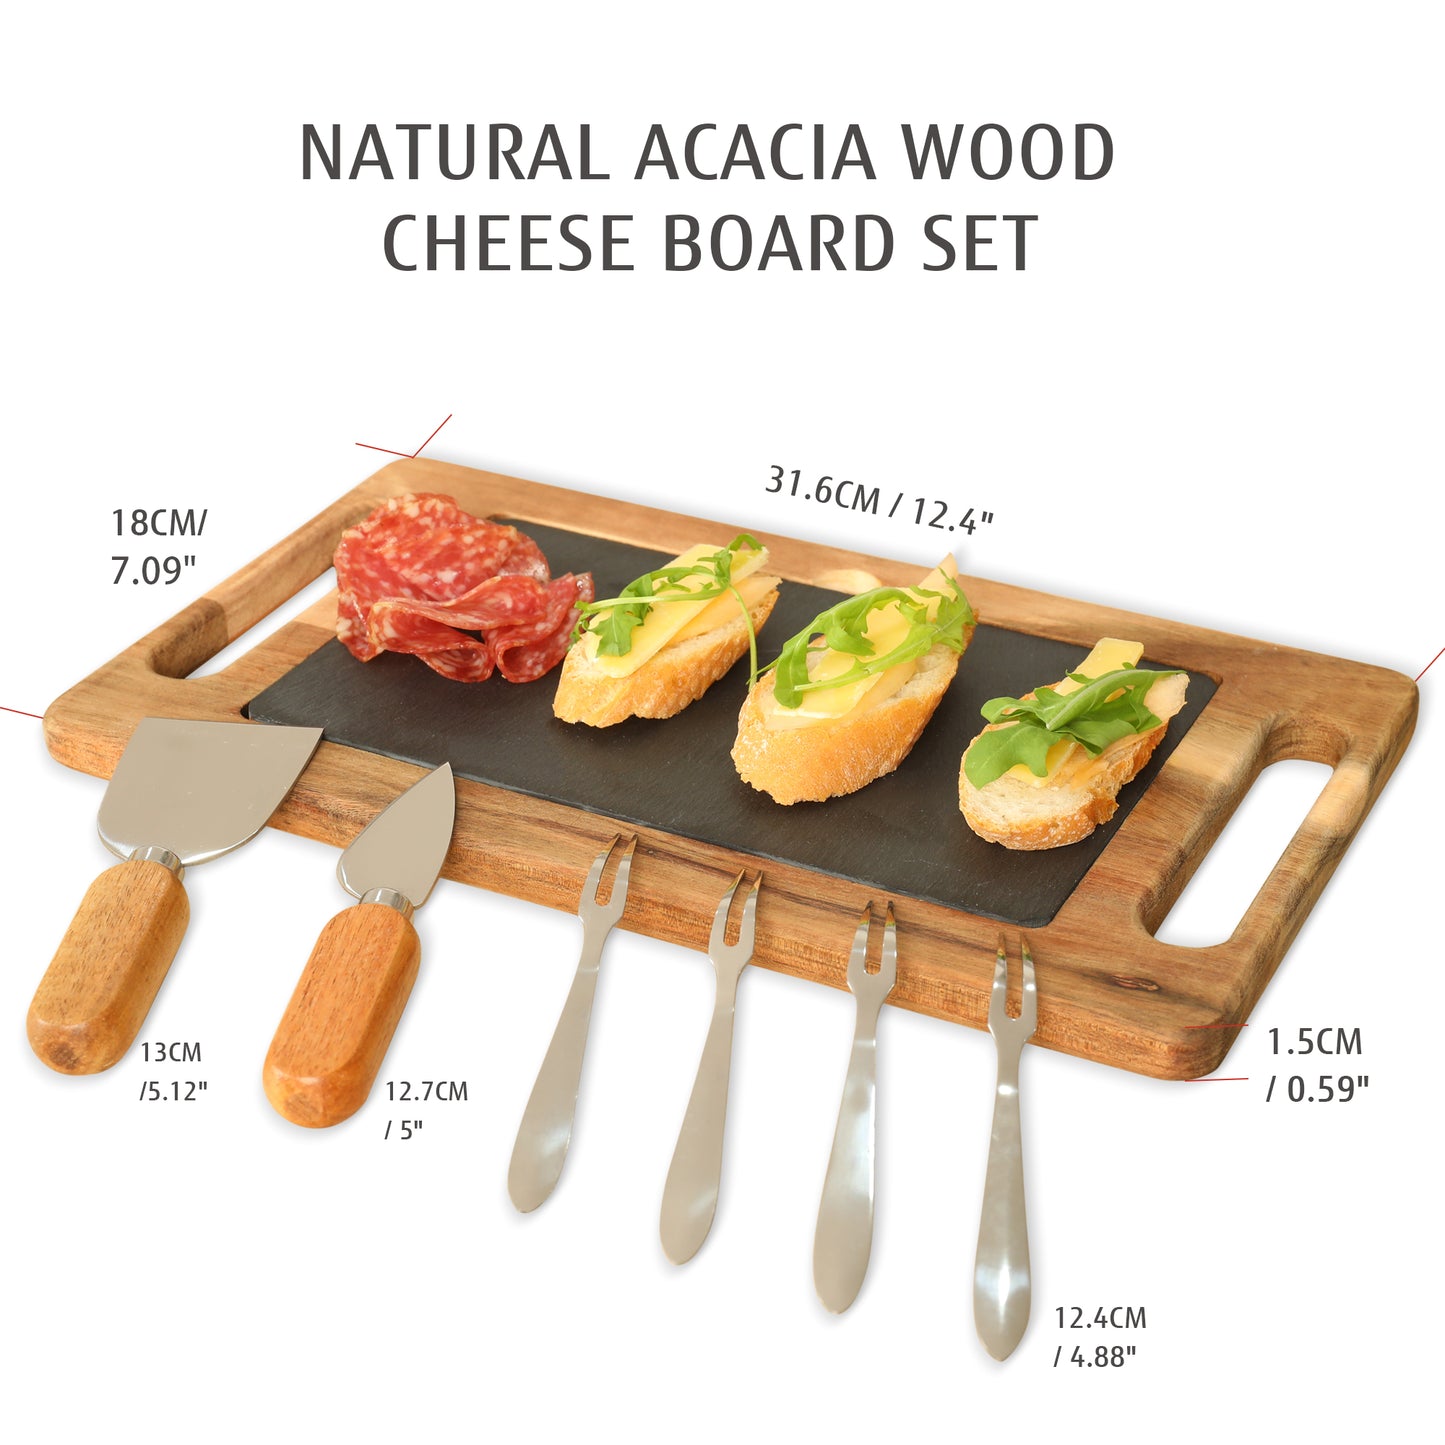 Hecef 13" Acacia Wood Cheese Board, Charcuterie Serving Platter with Black Slate, Cheese Tools for Housewarming Party Gift - Hecef Kitchen